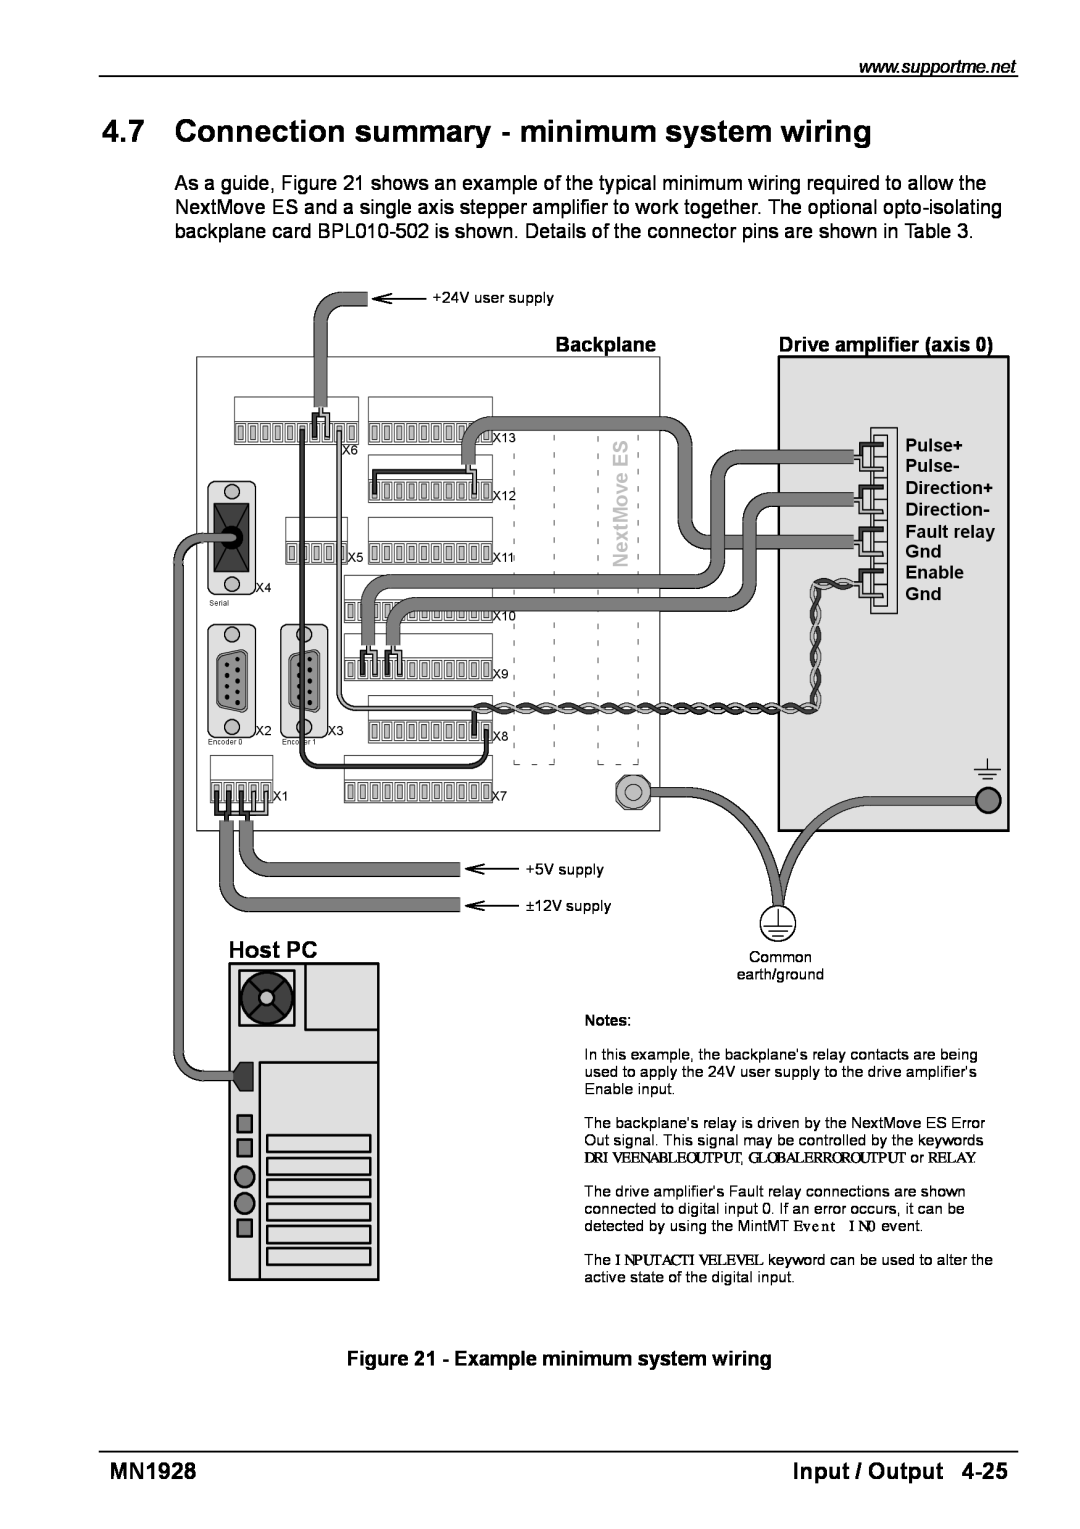 Baldor MN1928 Connection summary - minimum system wiring, Host PC, Input / Output, Drive amplifier axis, Backplane, Pulse+ 